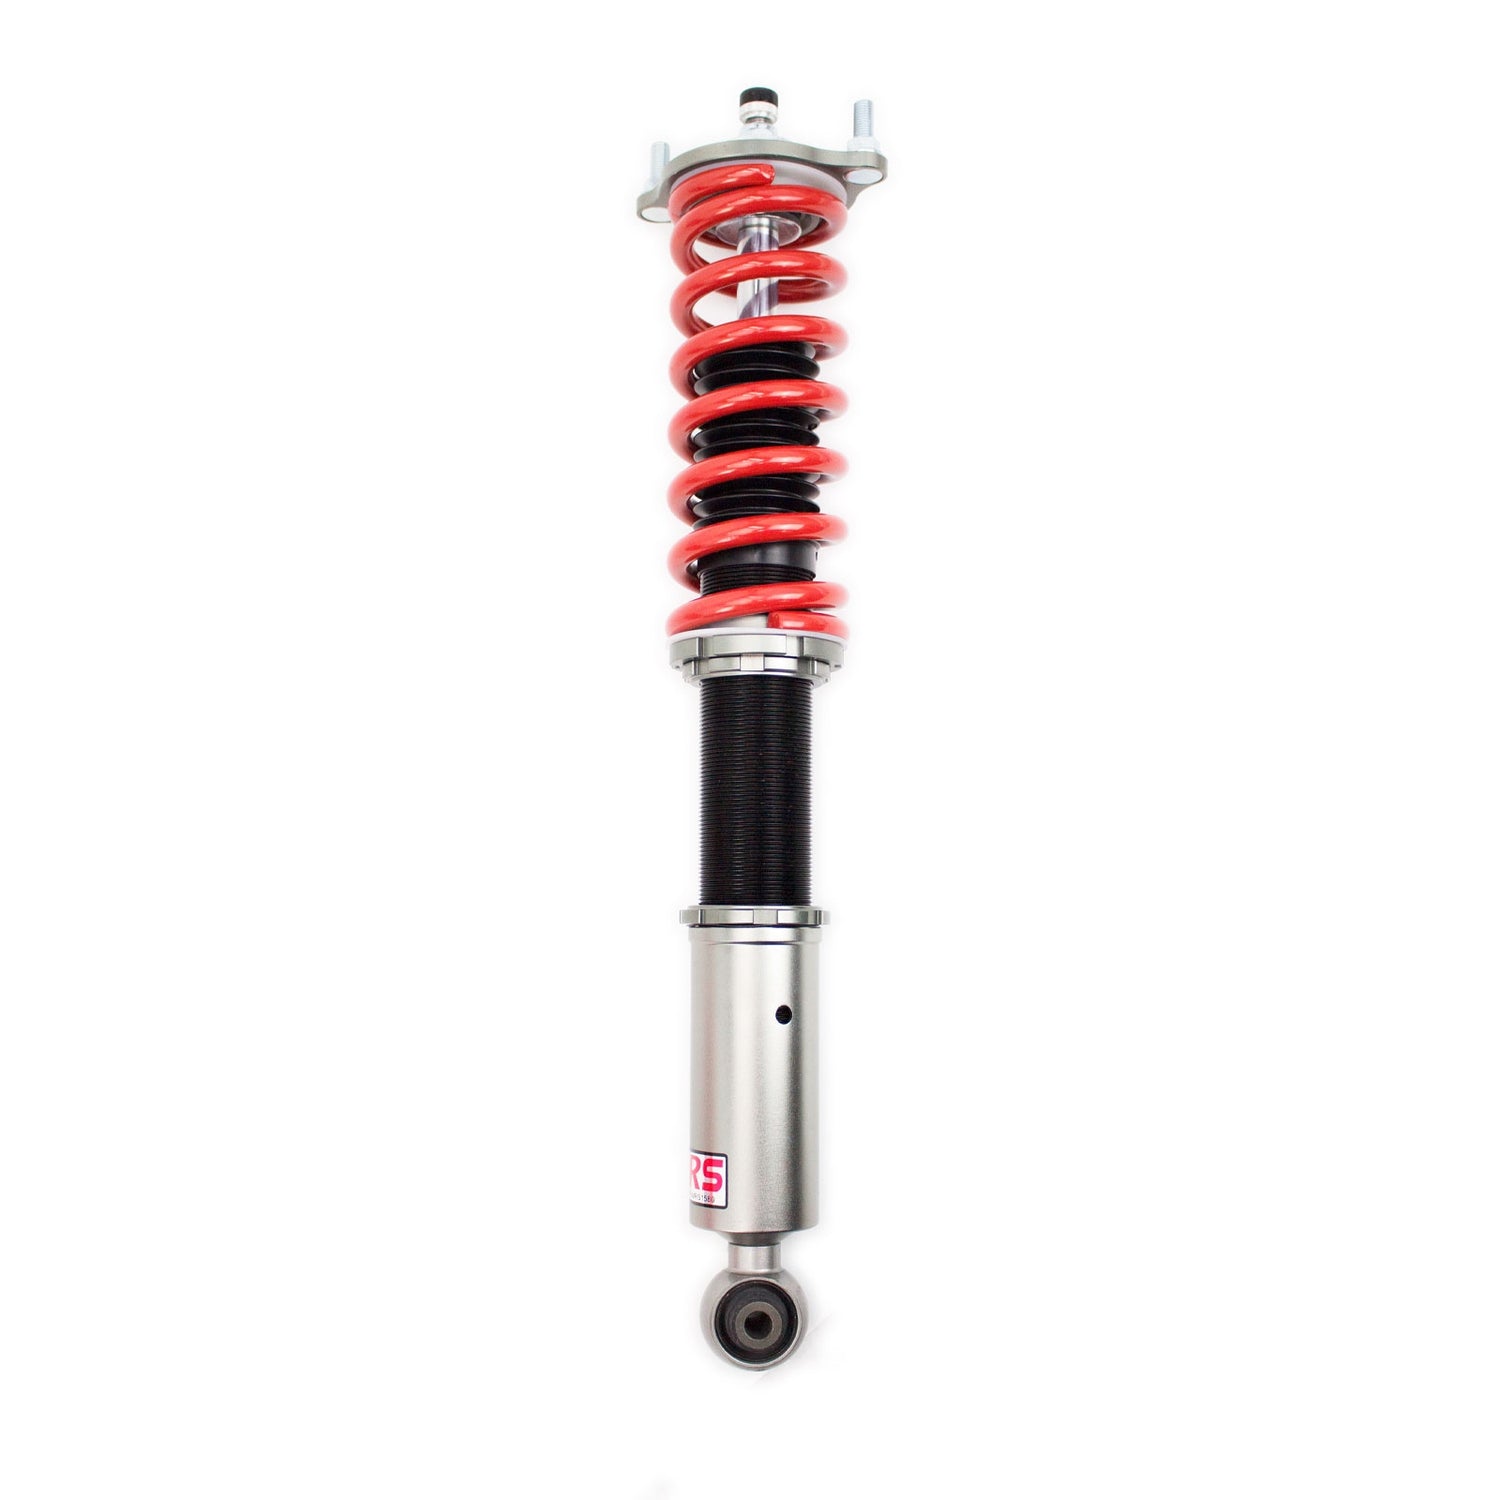 Godspeed MRS1580 MonoRS Coilover Lowering Kit, 32 Damping Adjustment, Ride Height Adjustable